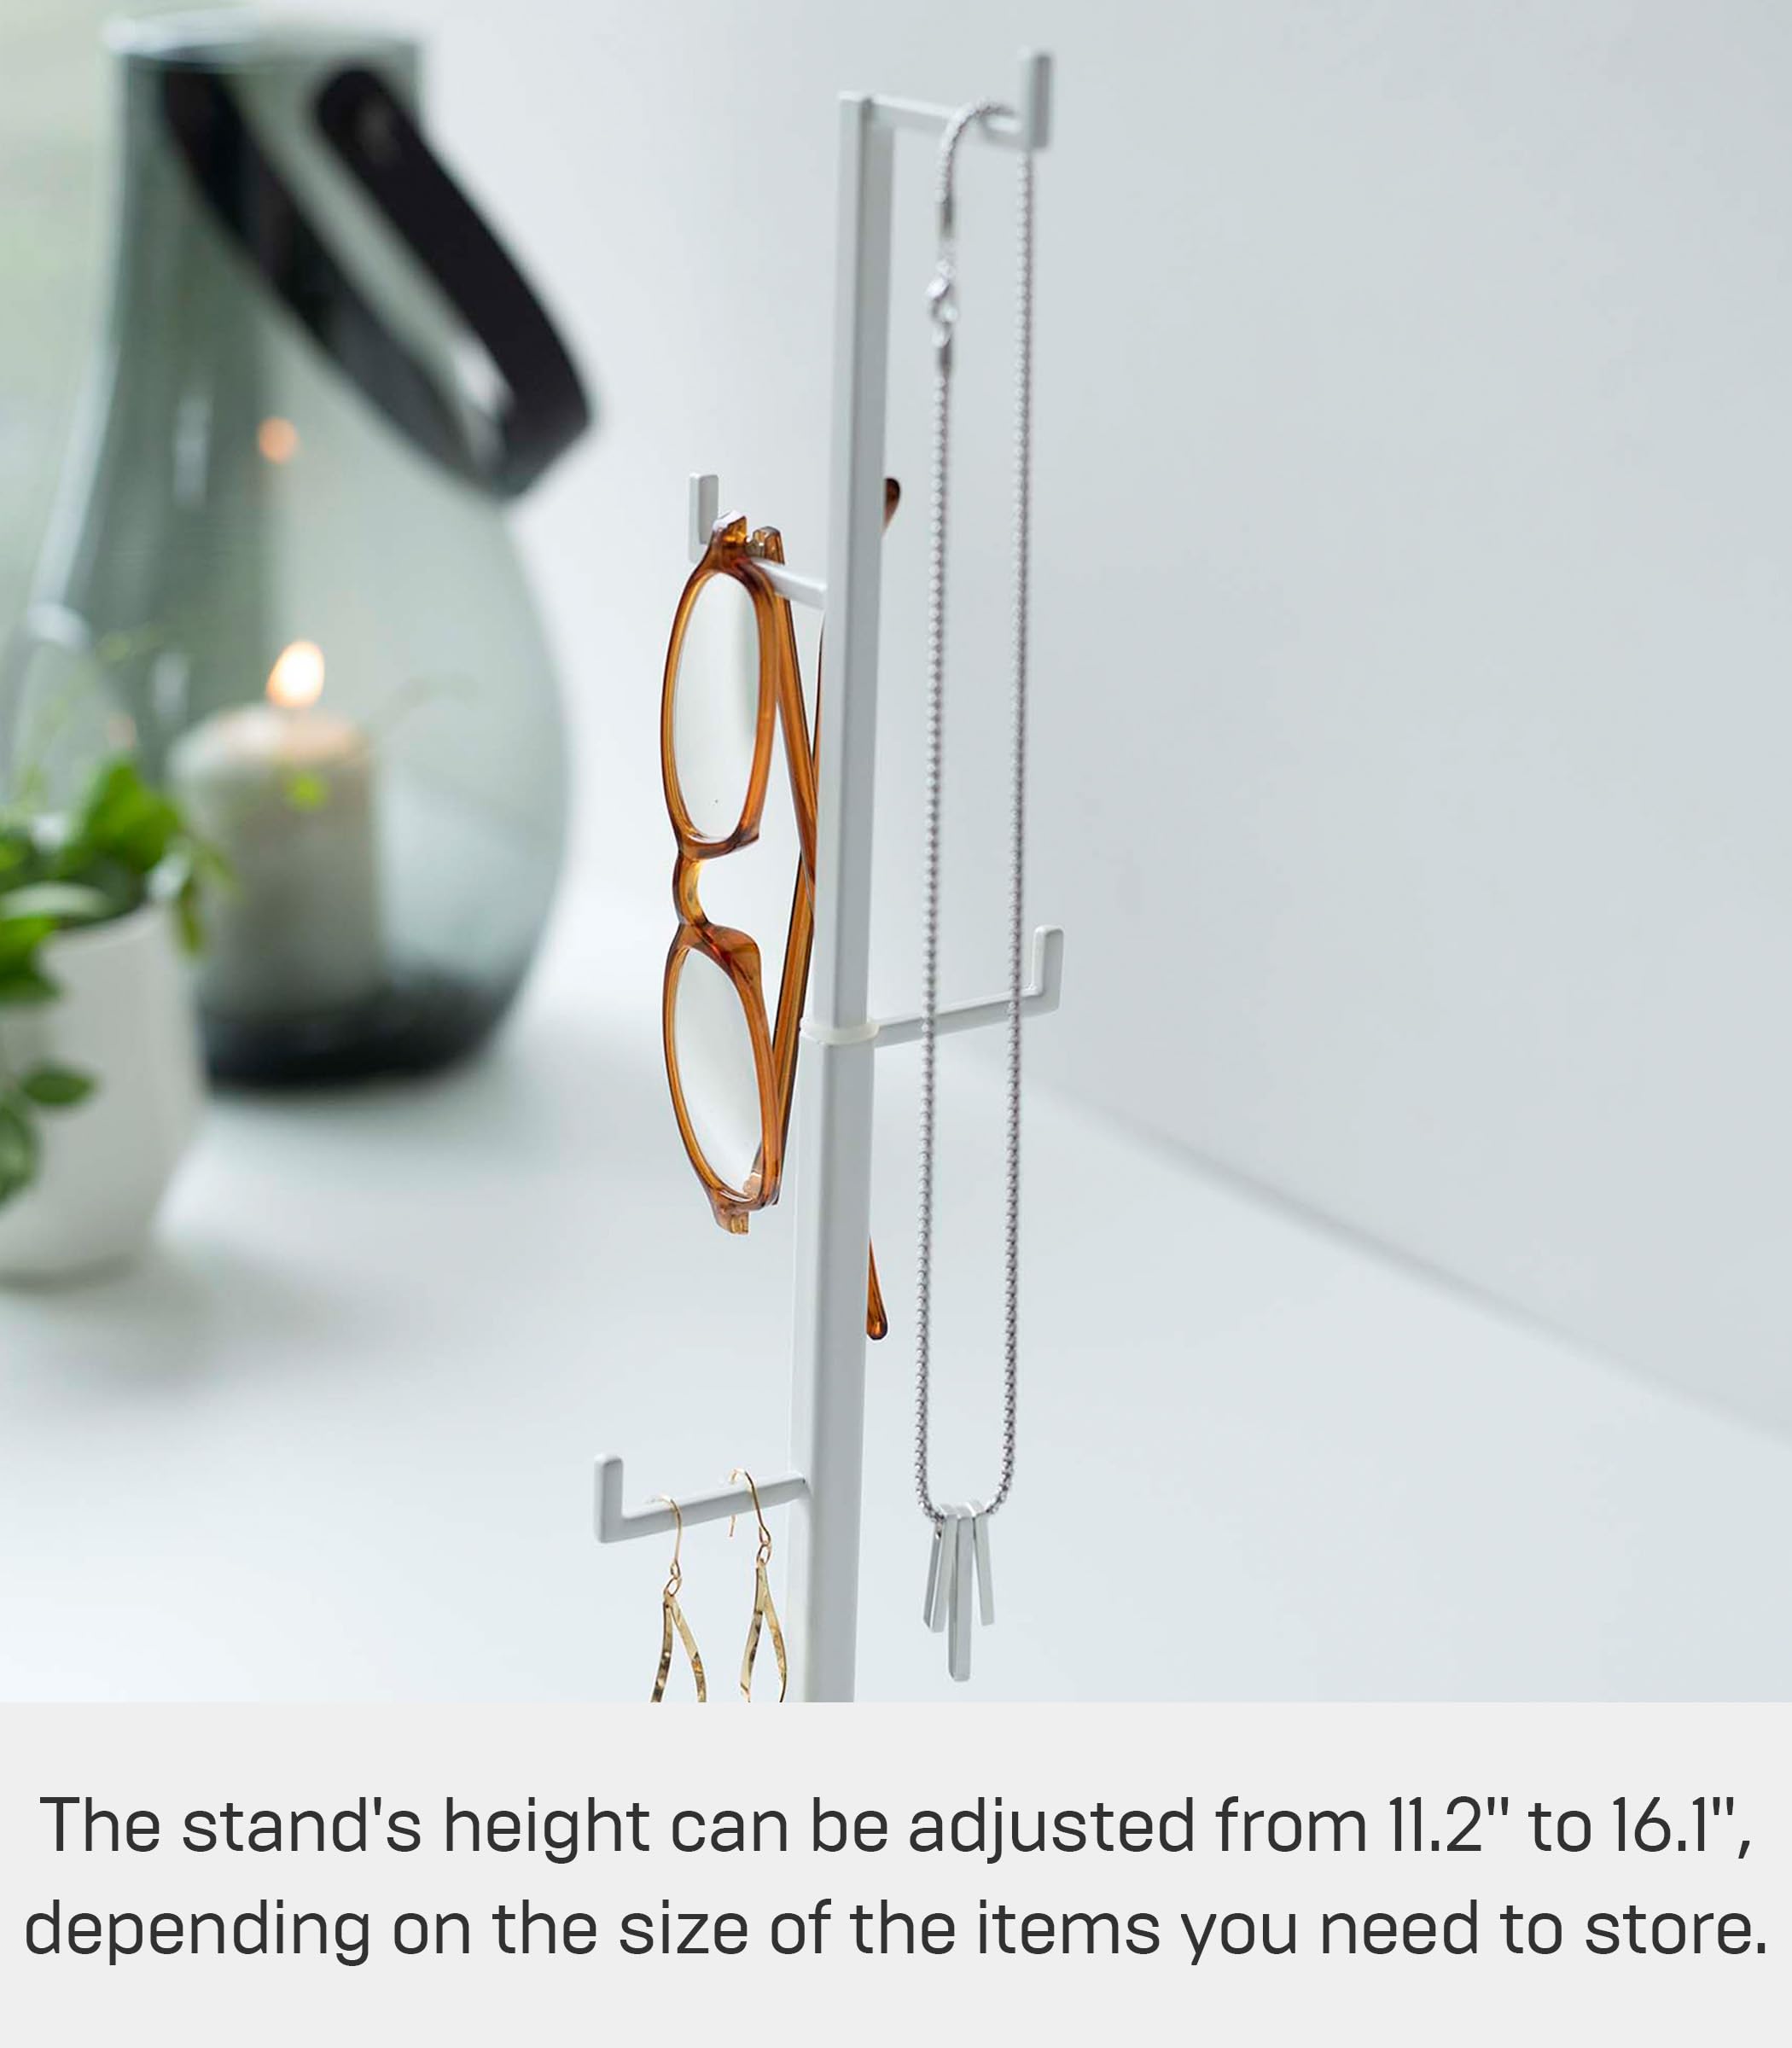 YAMAZAKI Home Tower Jewelry Display Stand Accessory Tree Organizer For Rings Necklaces Watch Earrings Or Glasses Storage - Steel